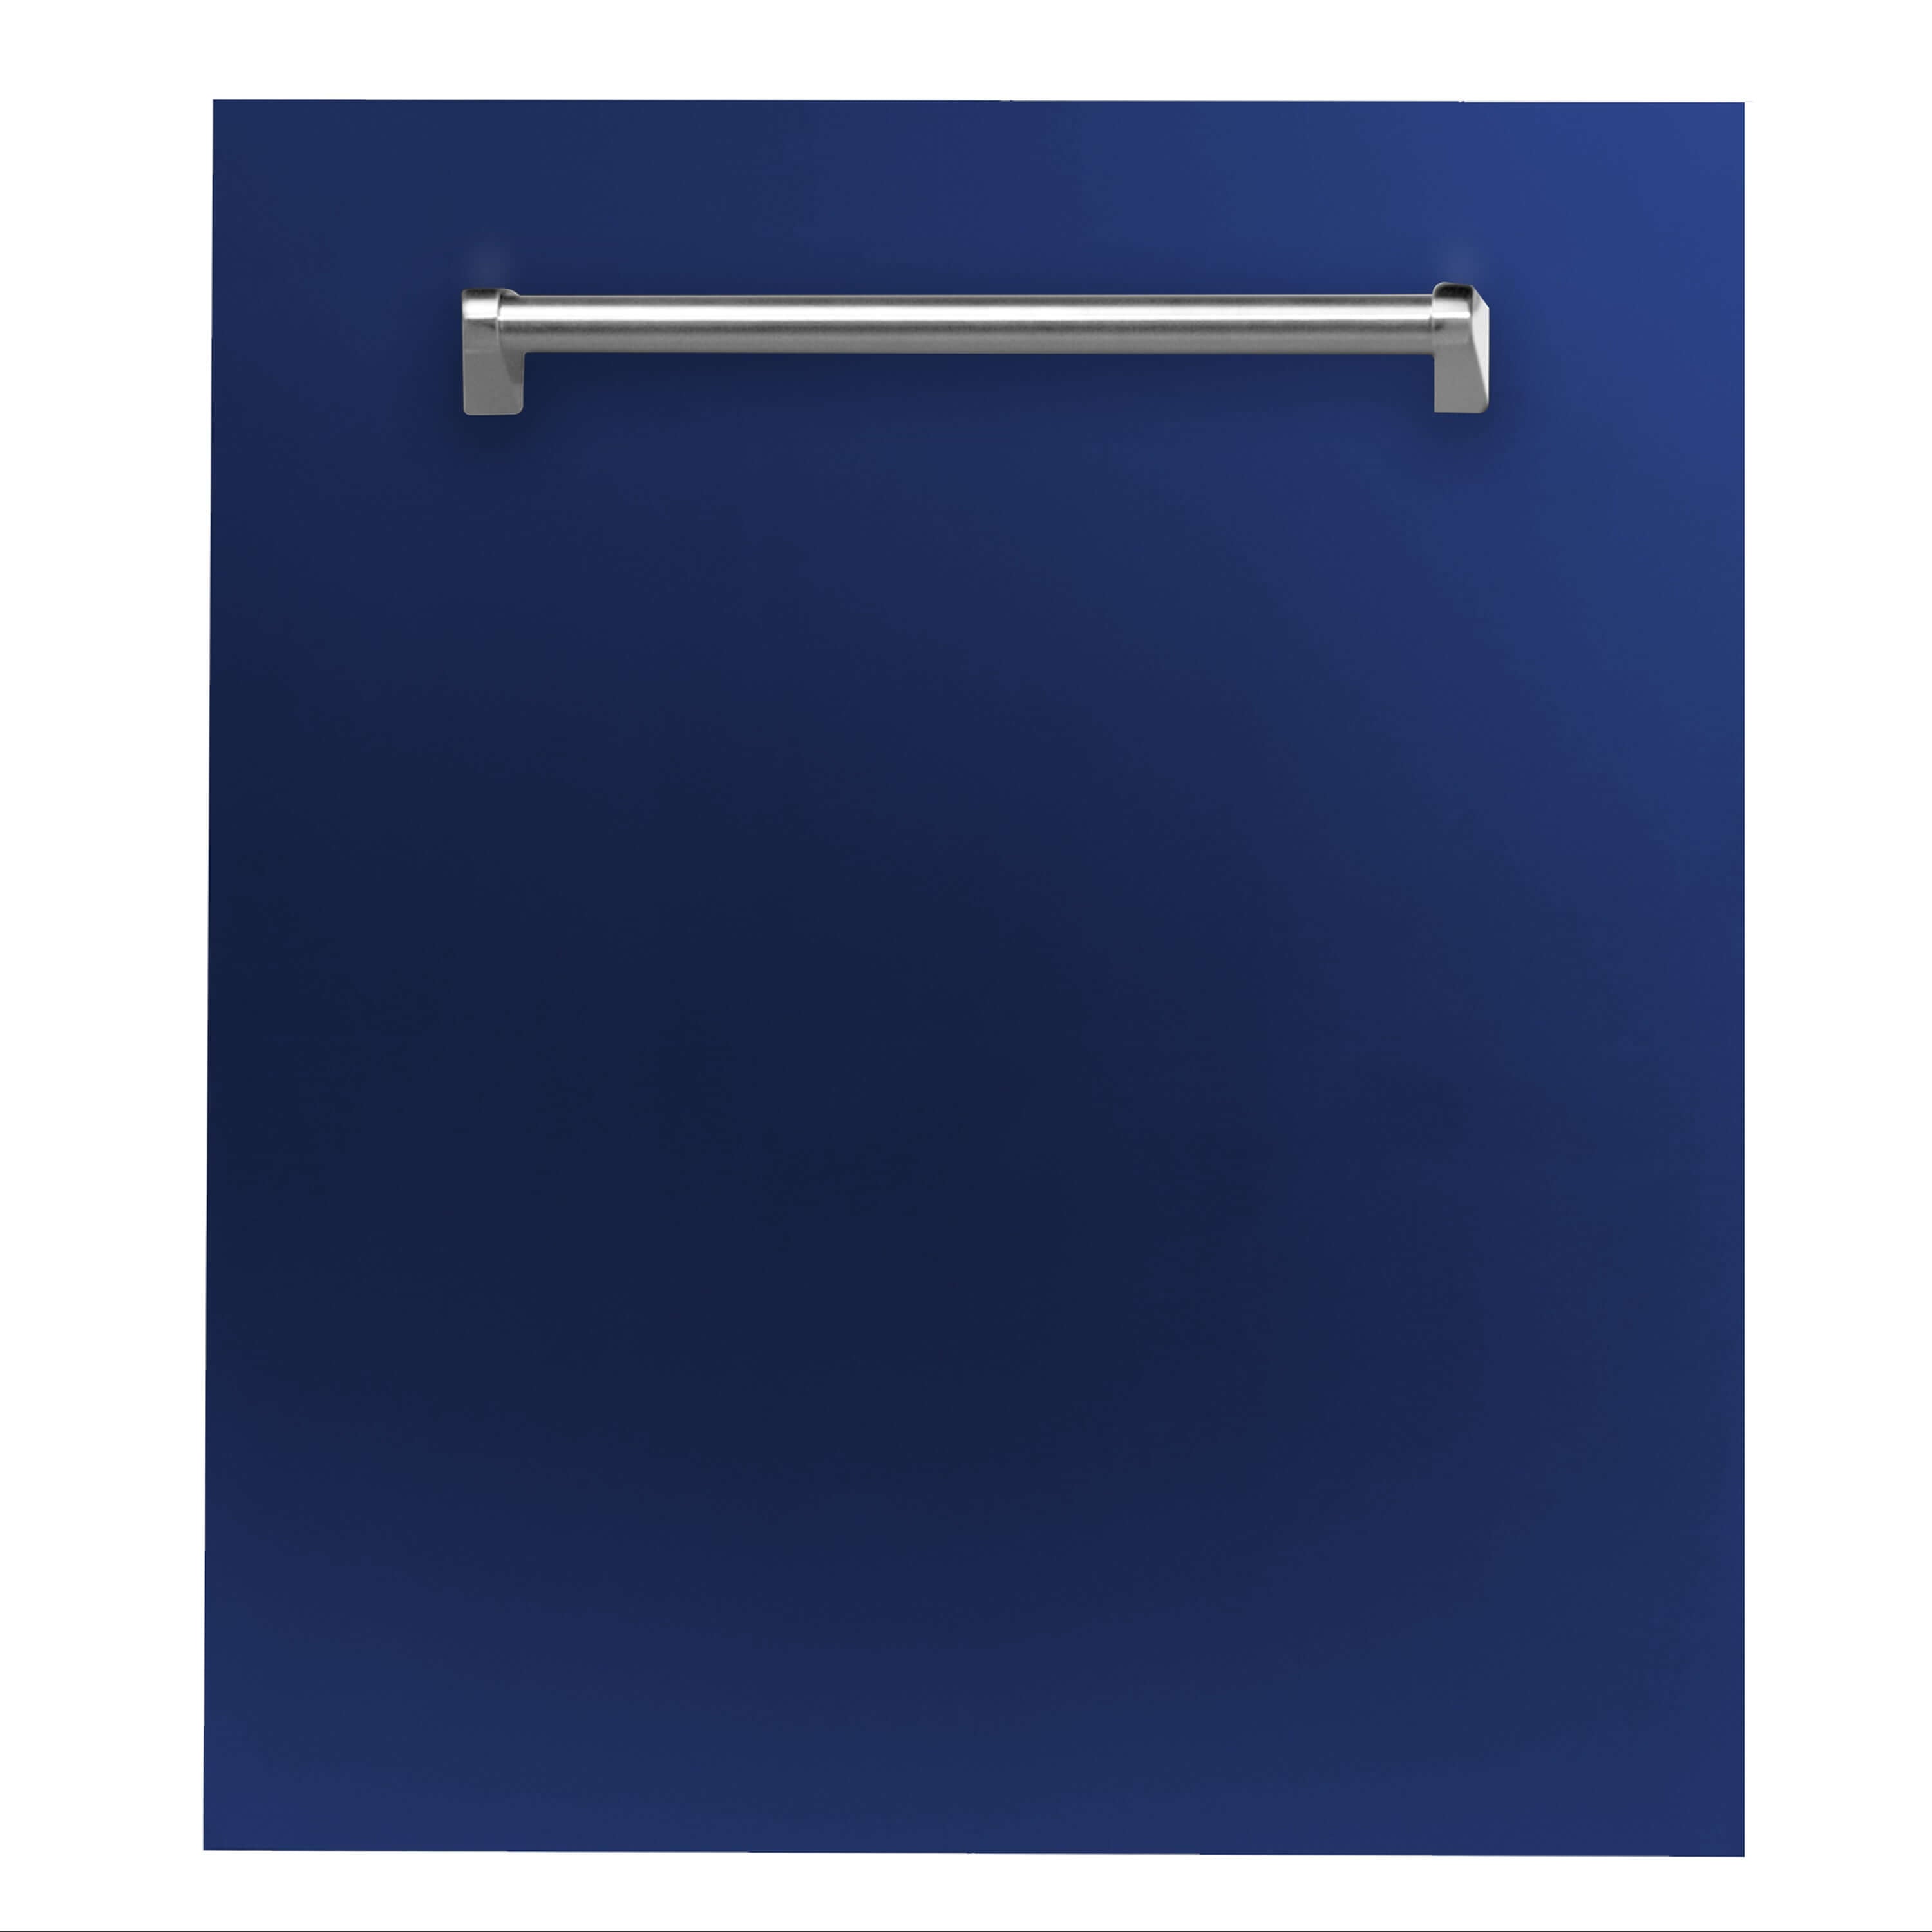 ZLINE 24 in. Blue Gloss Top Control Built-In Dishwasher with Stainless Steel Tub and Traditional Style Handle, 52dBa (DW-BG-24)